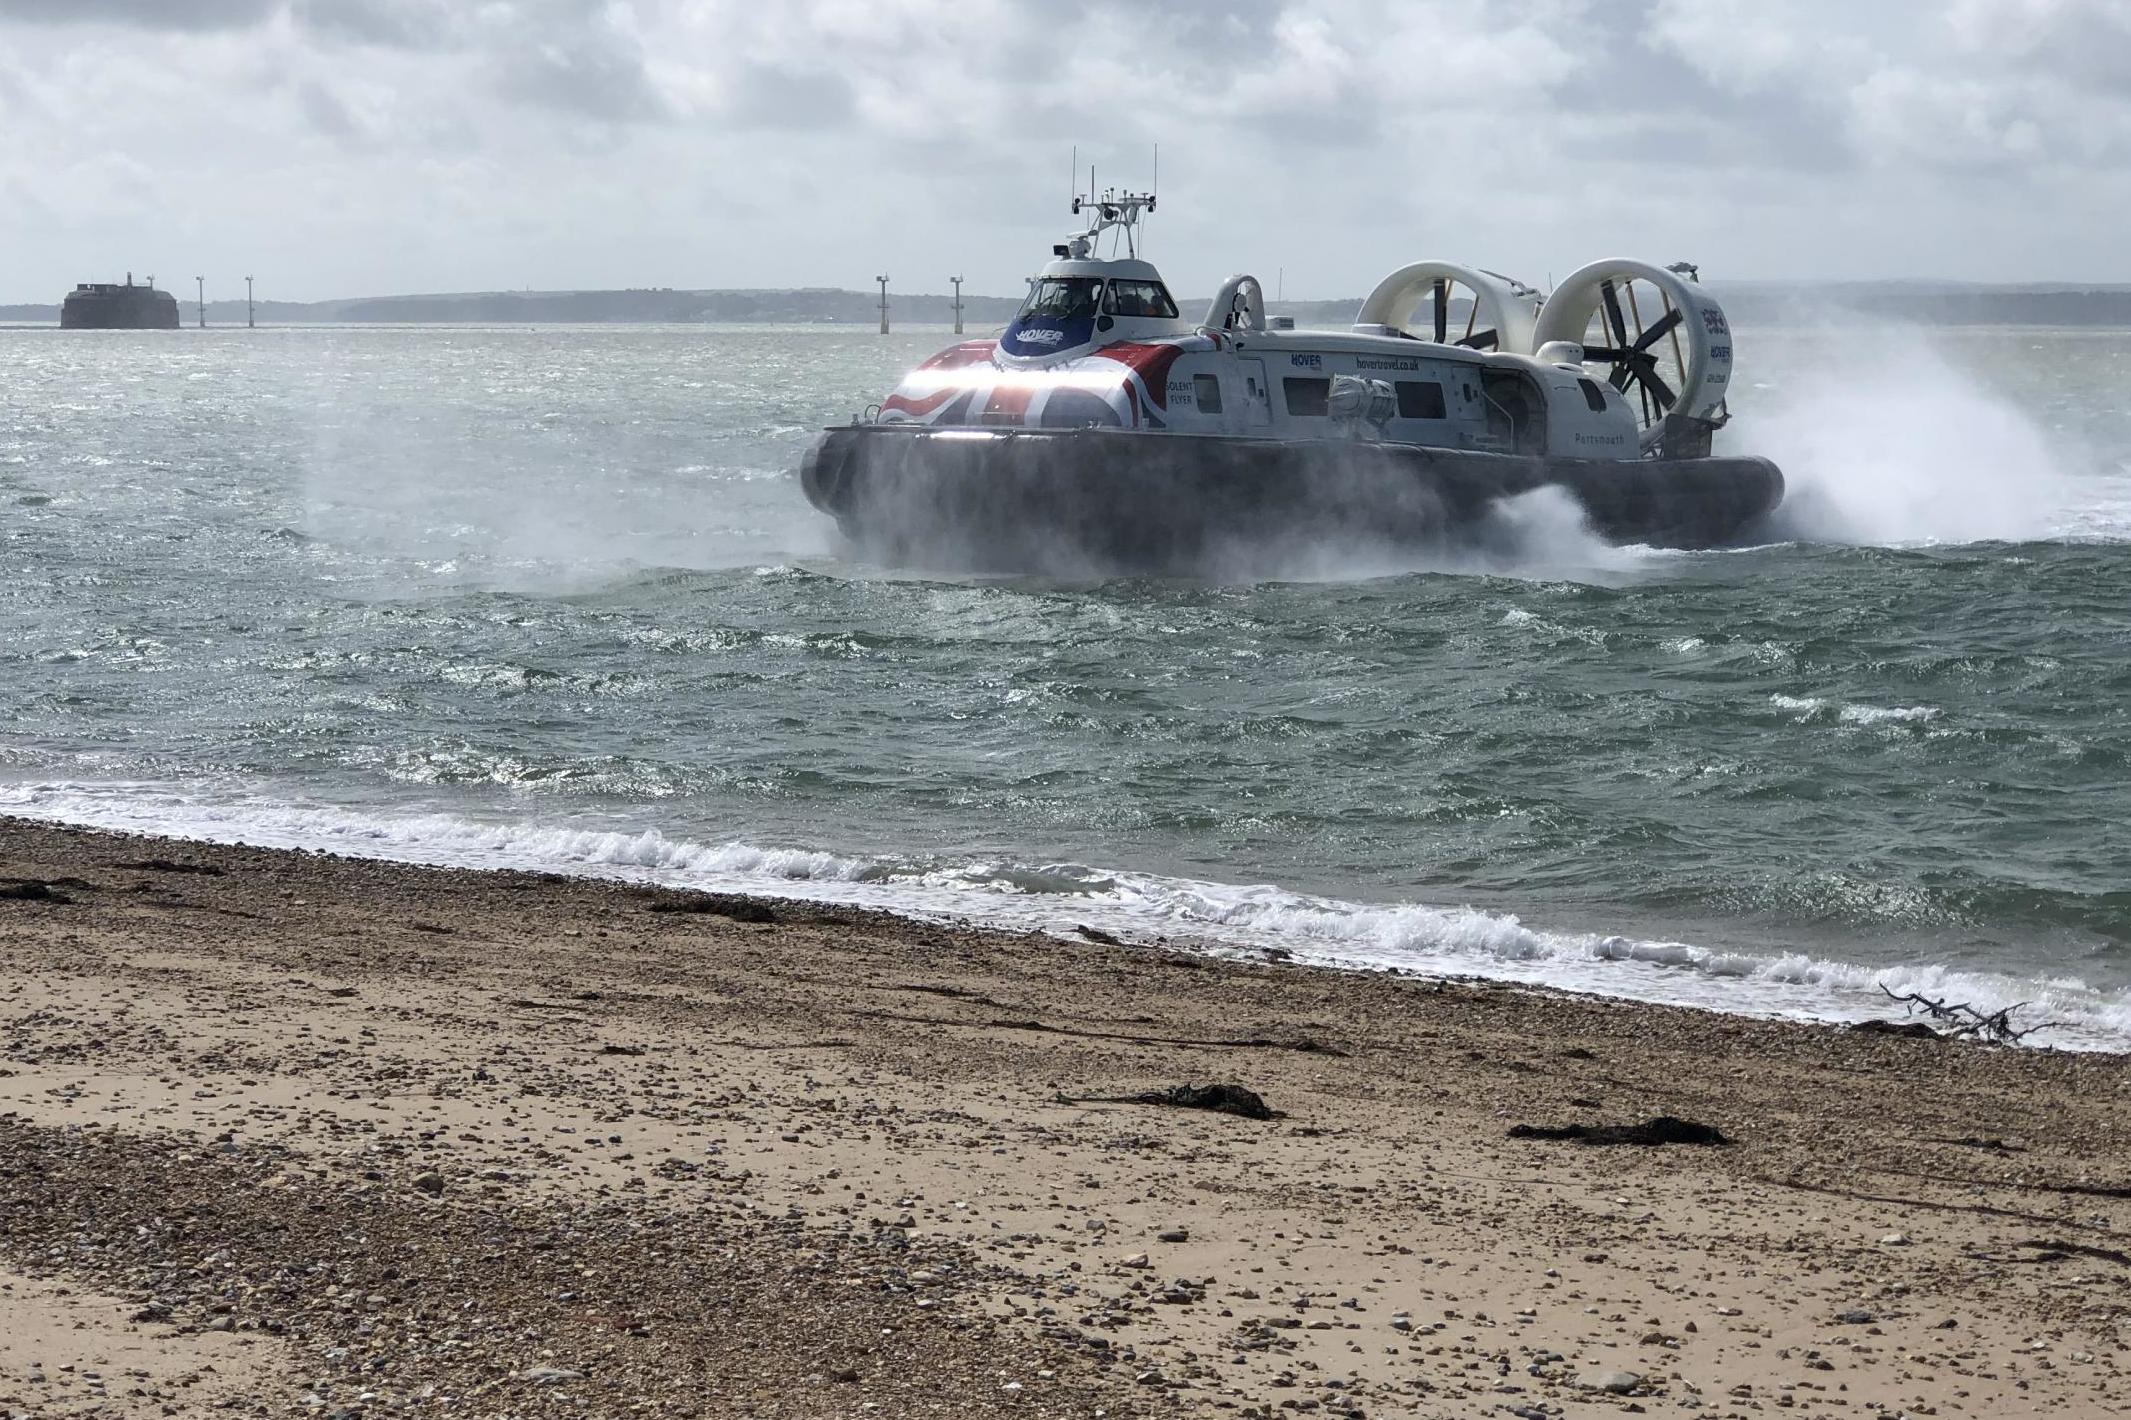 Power play: the hovercraft link between Southsea and Ryde in the Isle of Wight